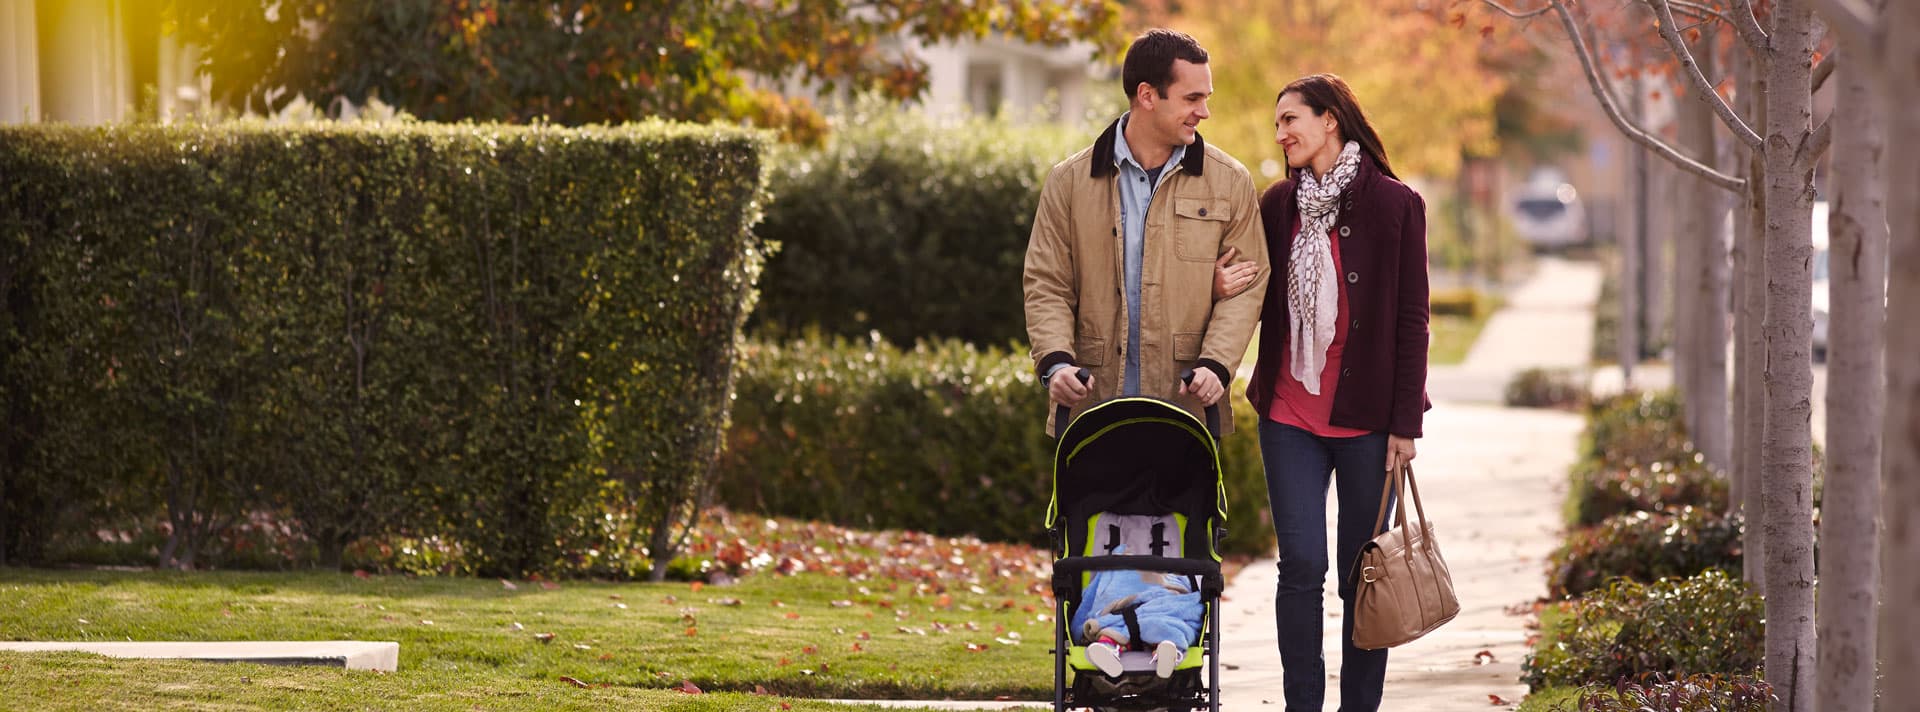 Couple walking with baby stroller